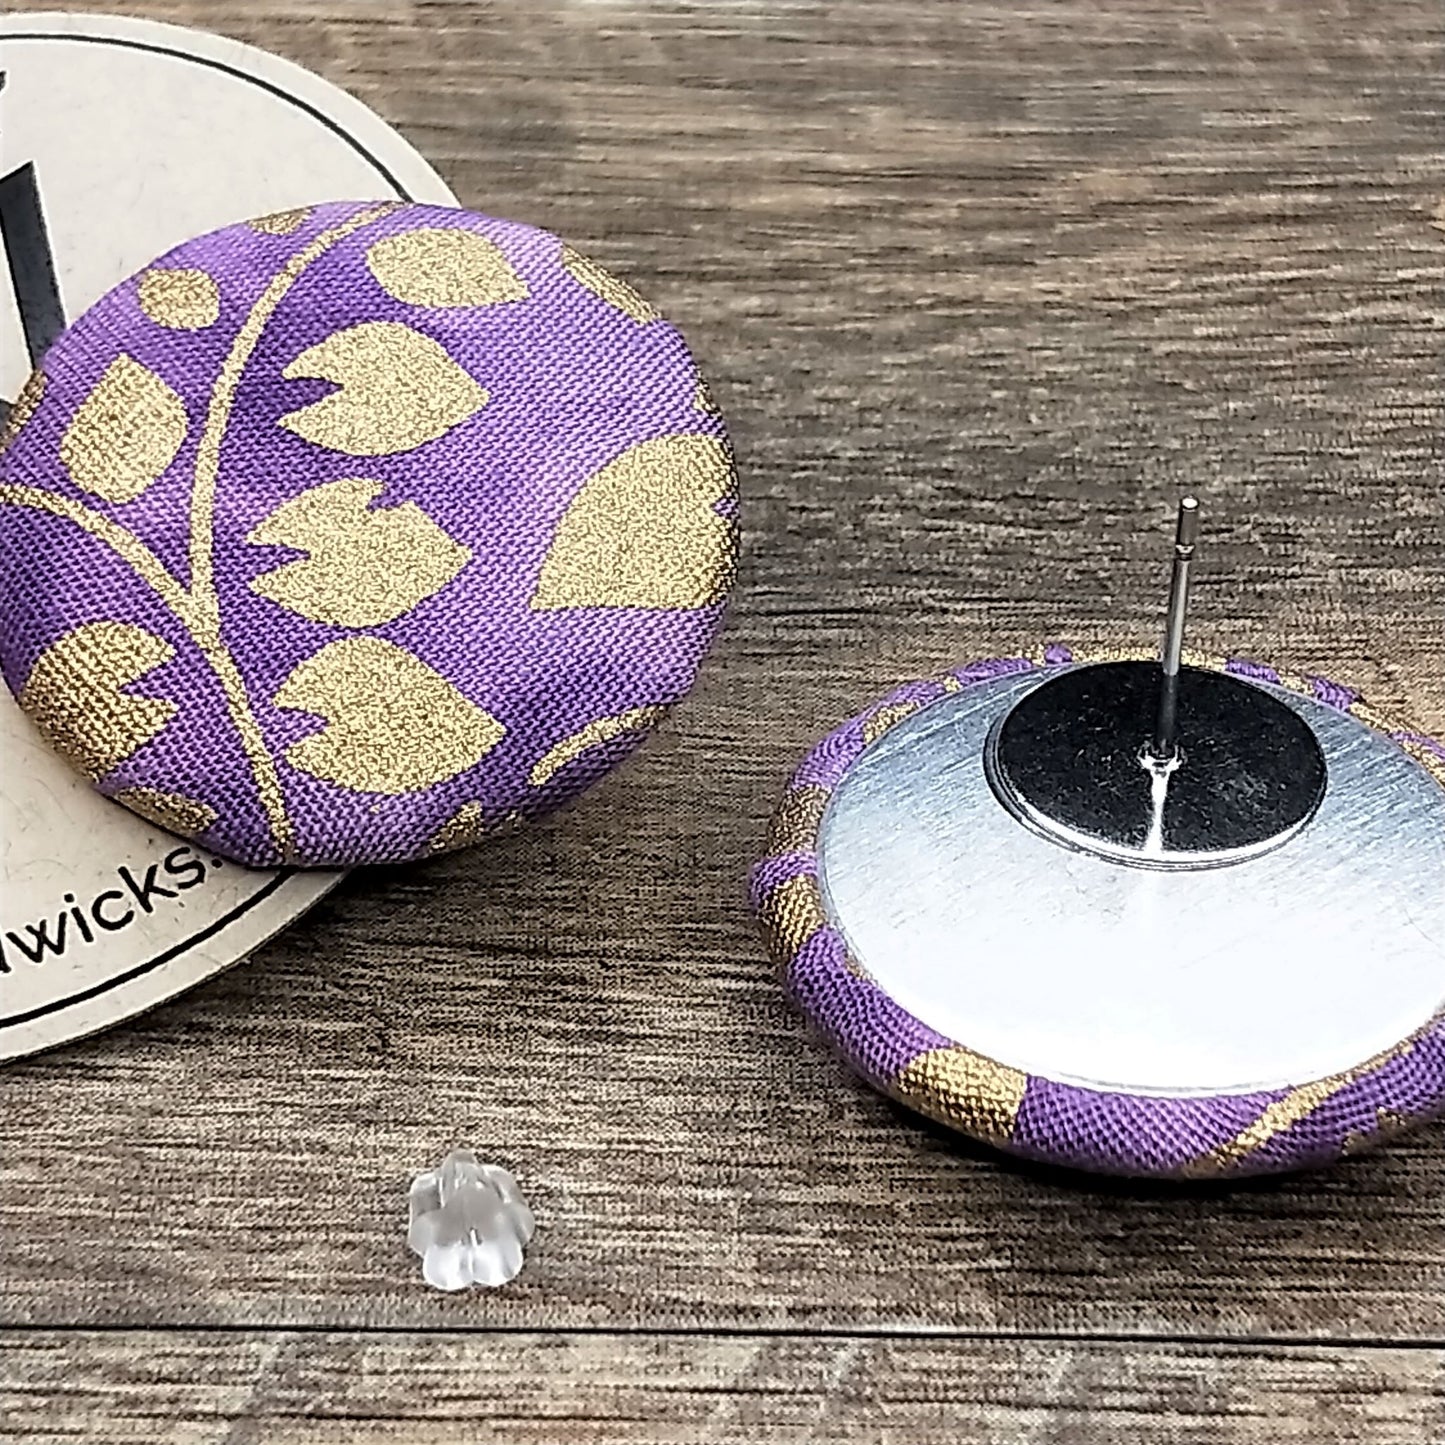 Wildears Fabric Covered Button Earrings Gold Leaf Purple 27mm